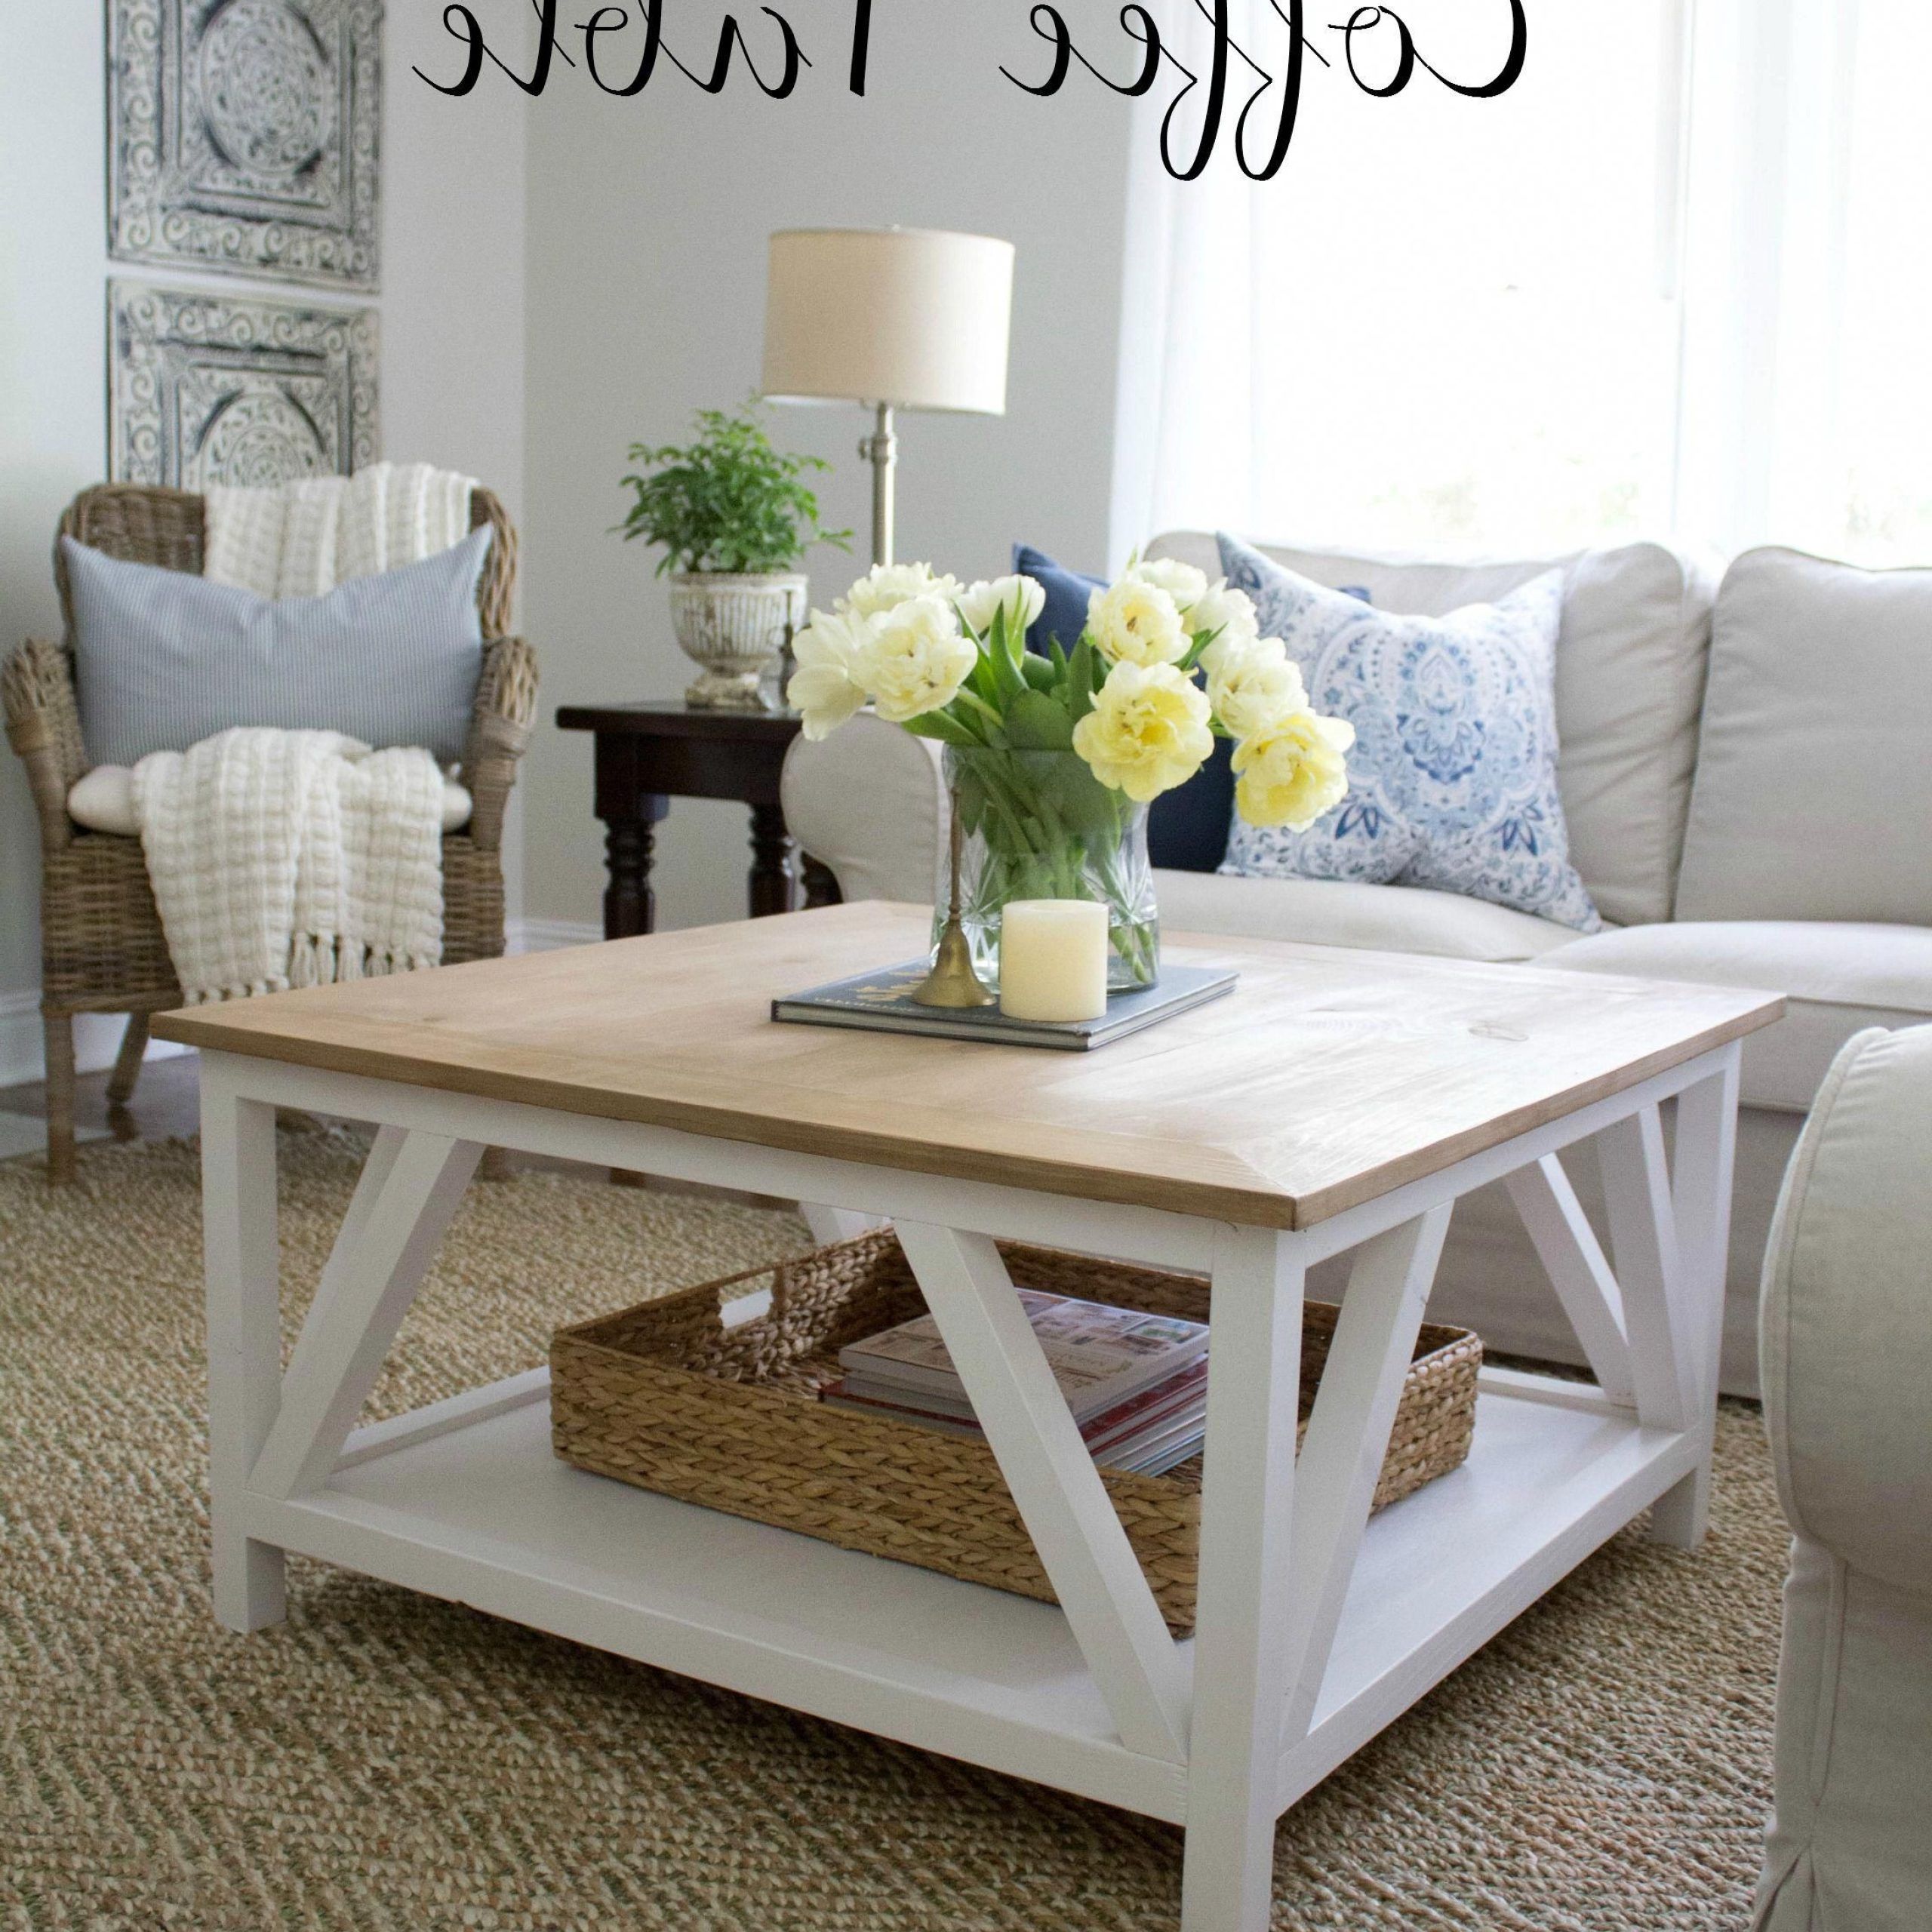 Rustic Farmhouse Coffee Table With Storage / Amazon Com Rustic Regarding Living Room Farmhouse Coffee Tables (View 13 of 20)